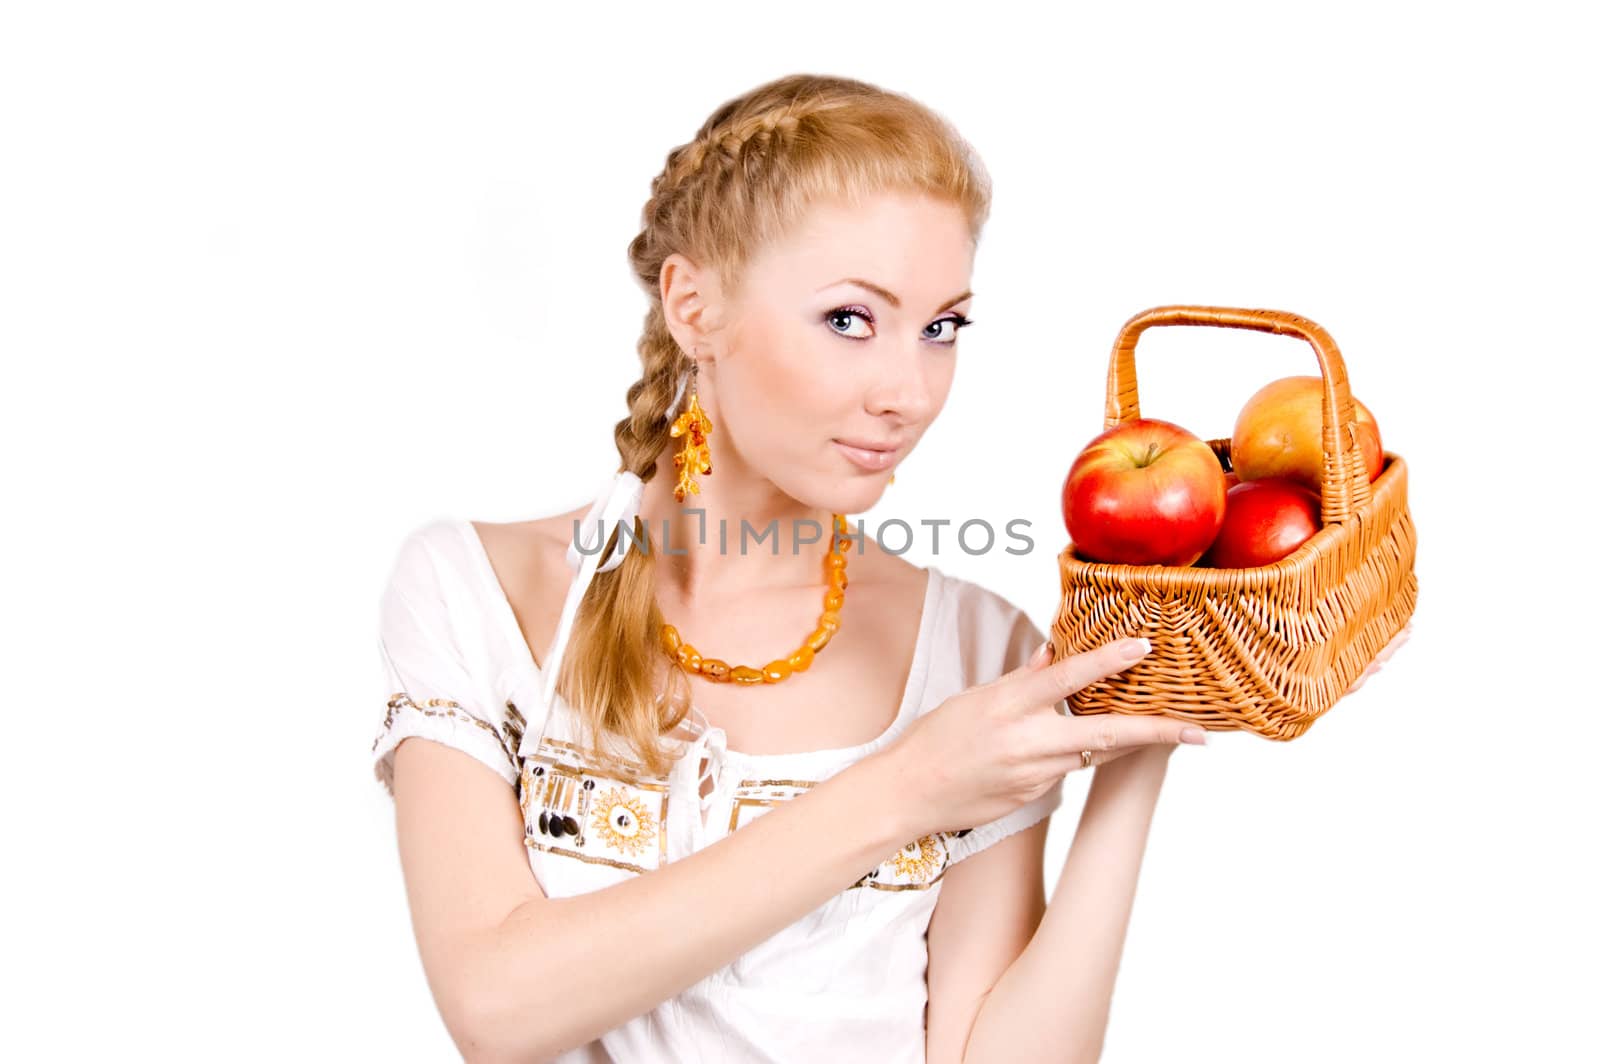 Holding basket of apples by Angel_a